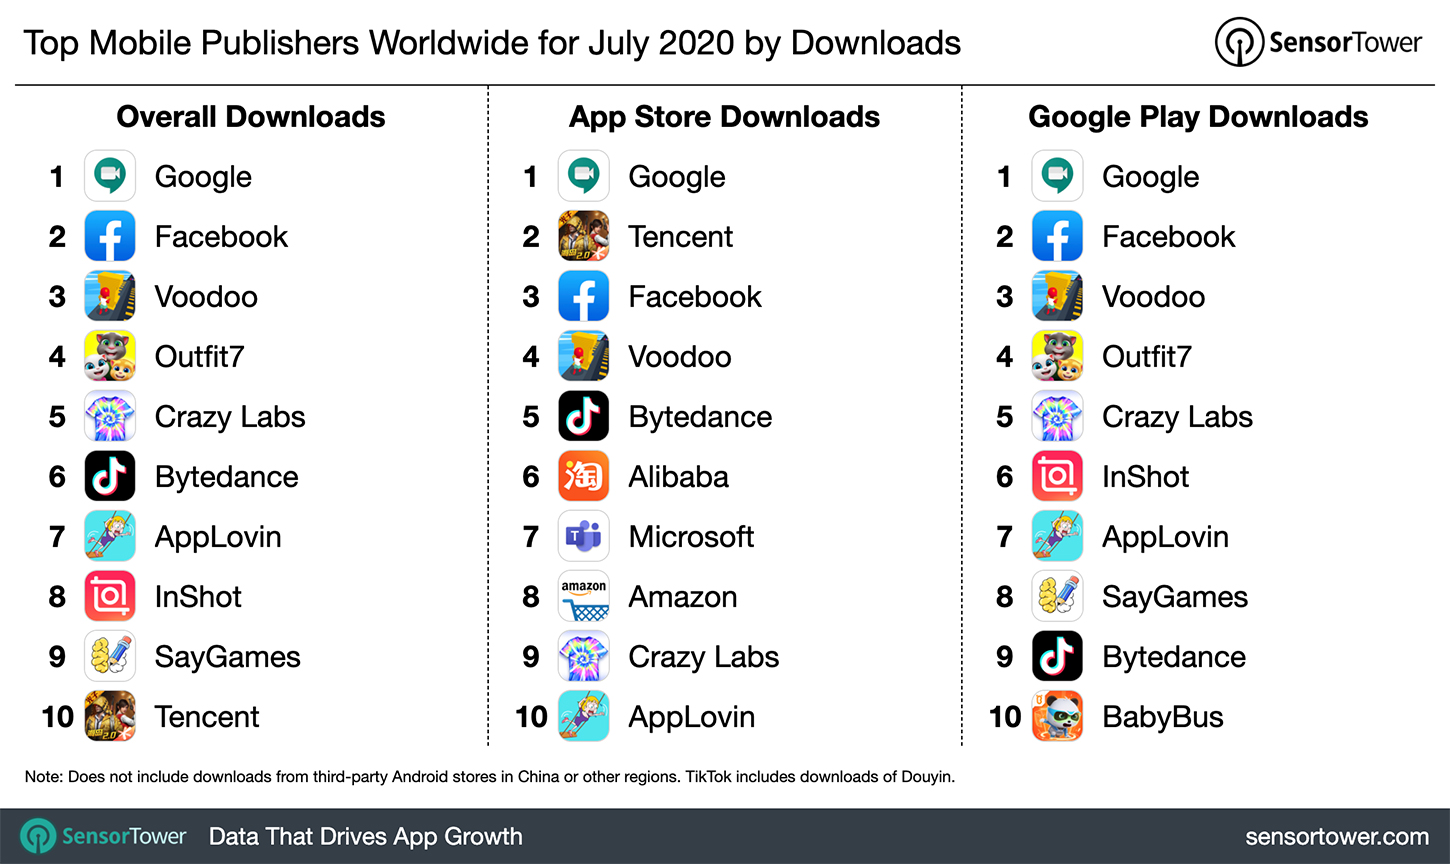 Top Mobile Publishers Worldwide for July 2020 by Downloads